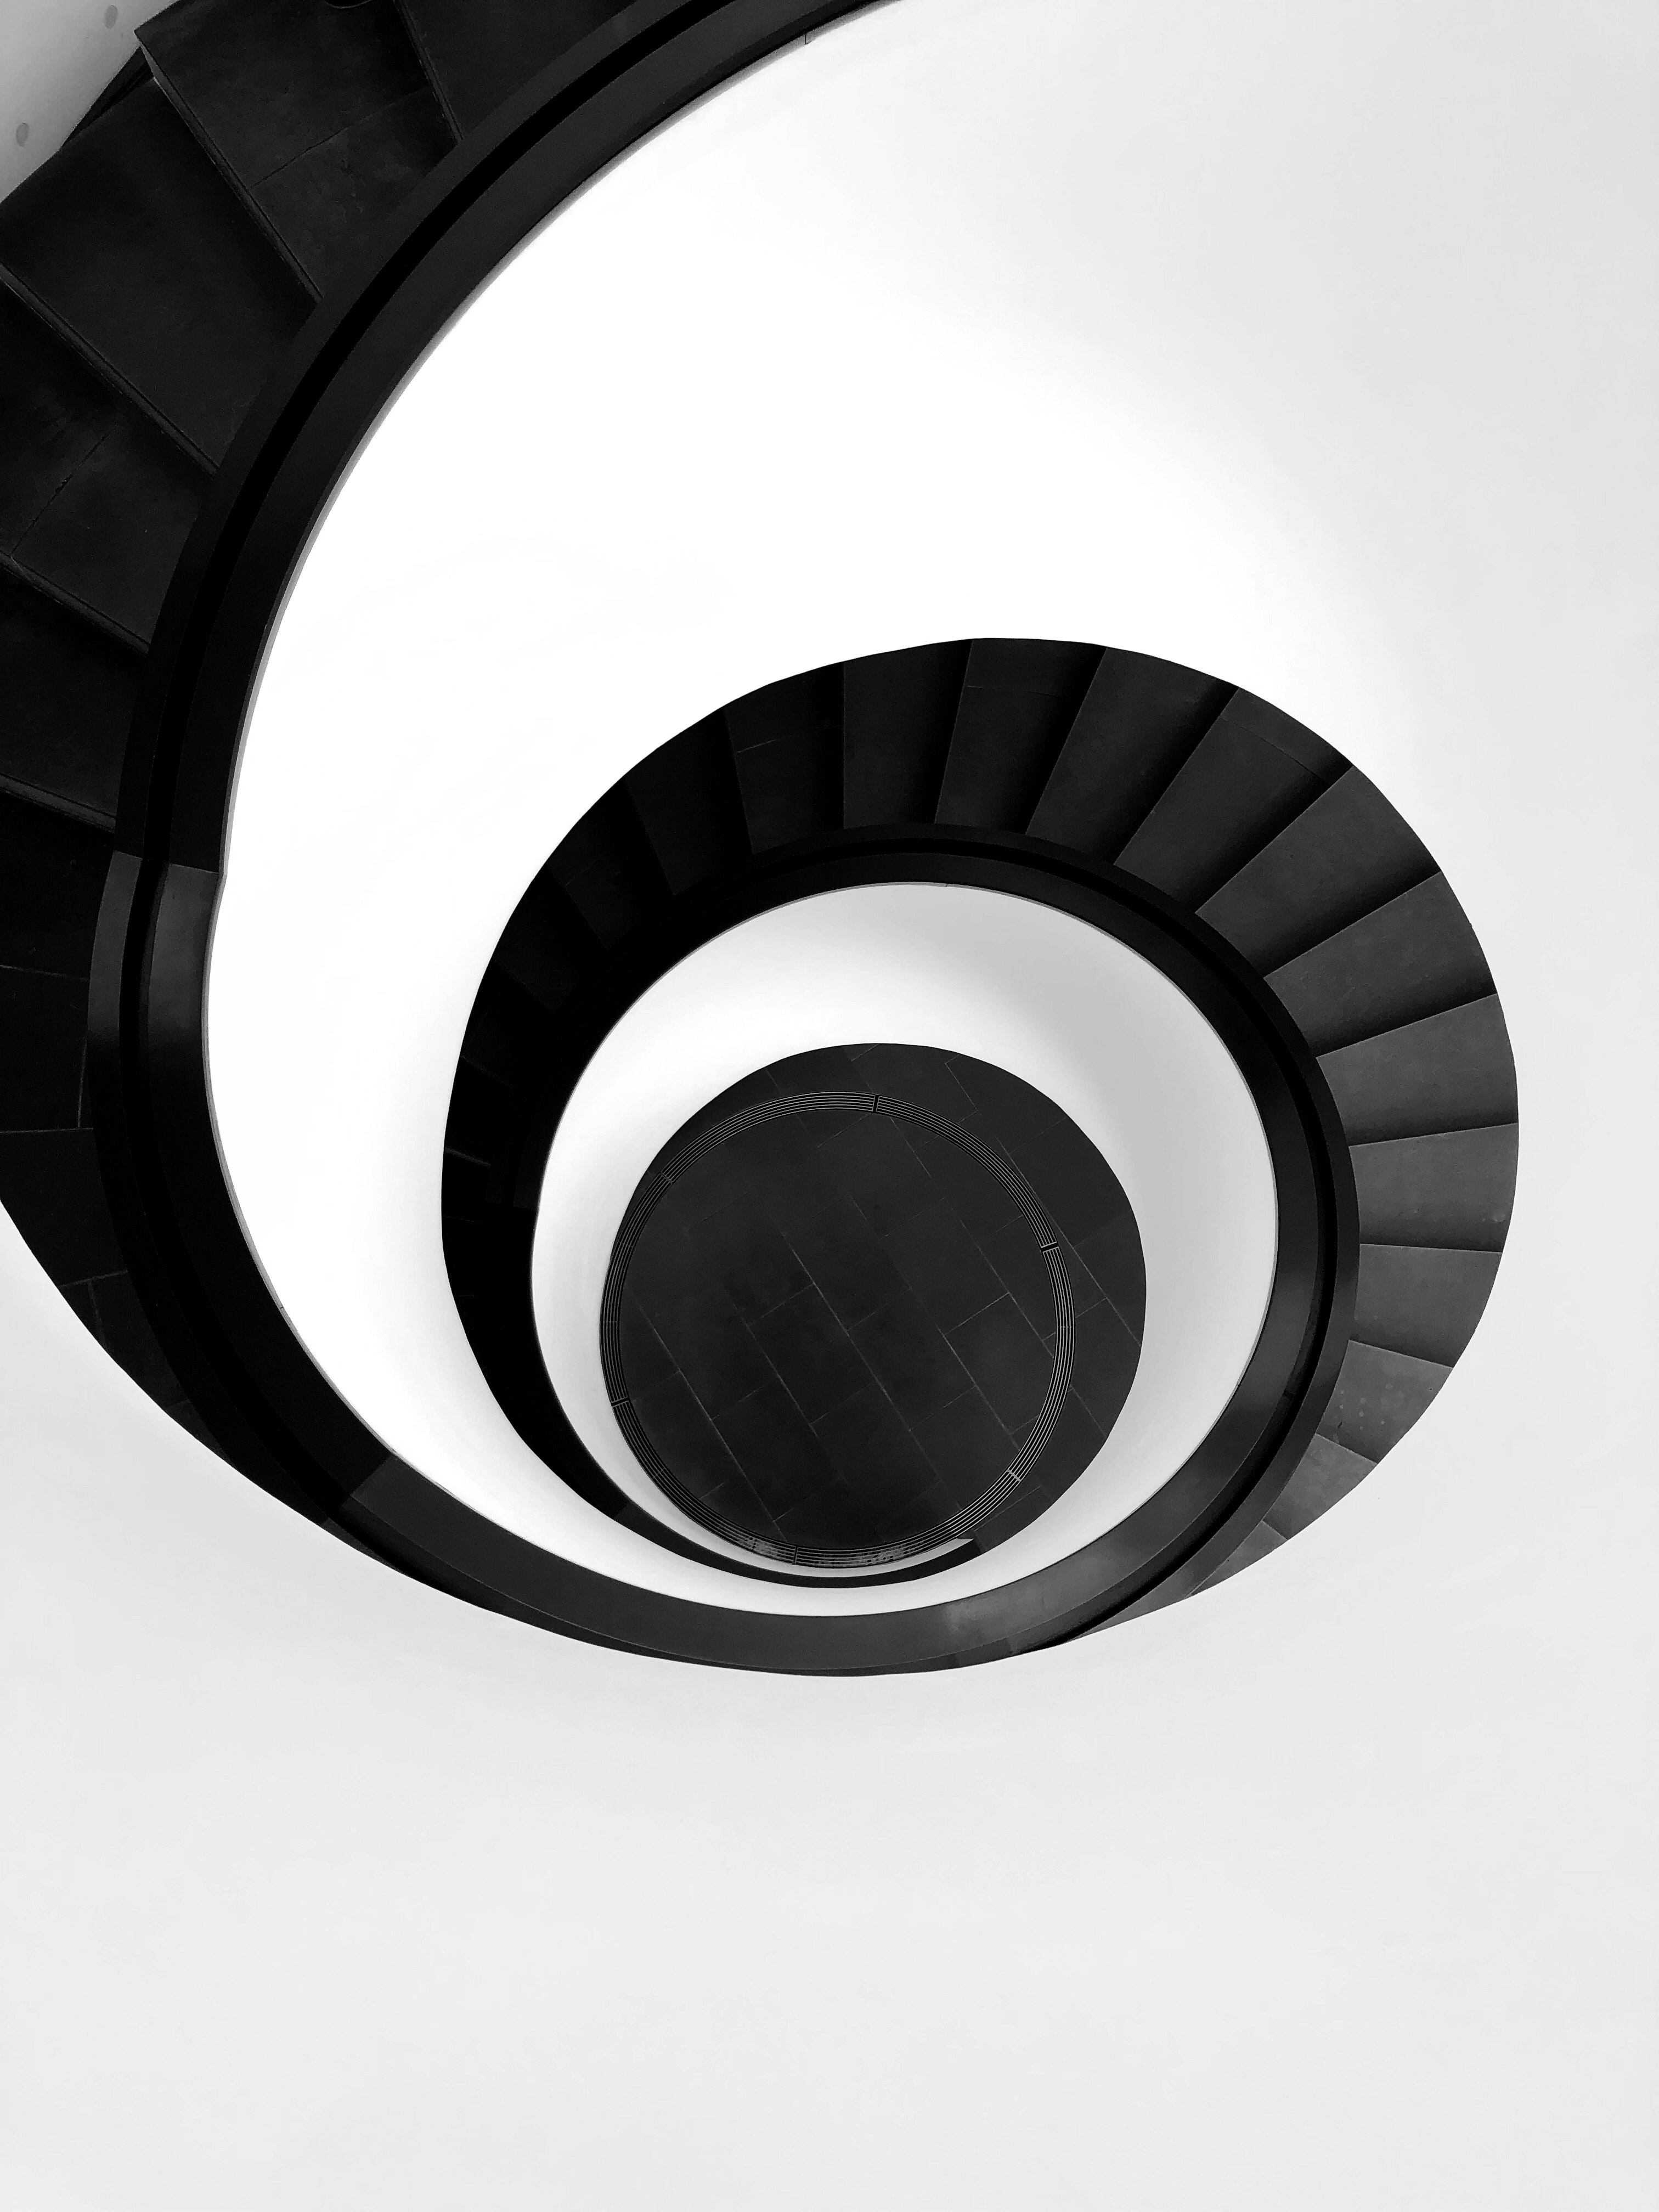 Spiral staircase with black steps and white walls, viewed from above. Picture by Robin Schreiner from Pexels.com